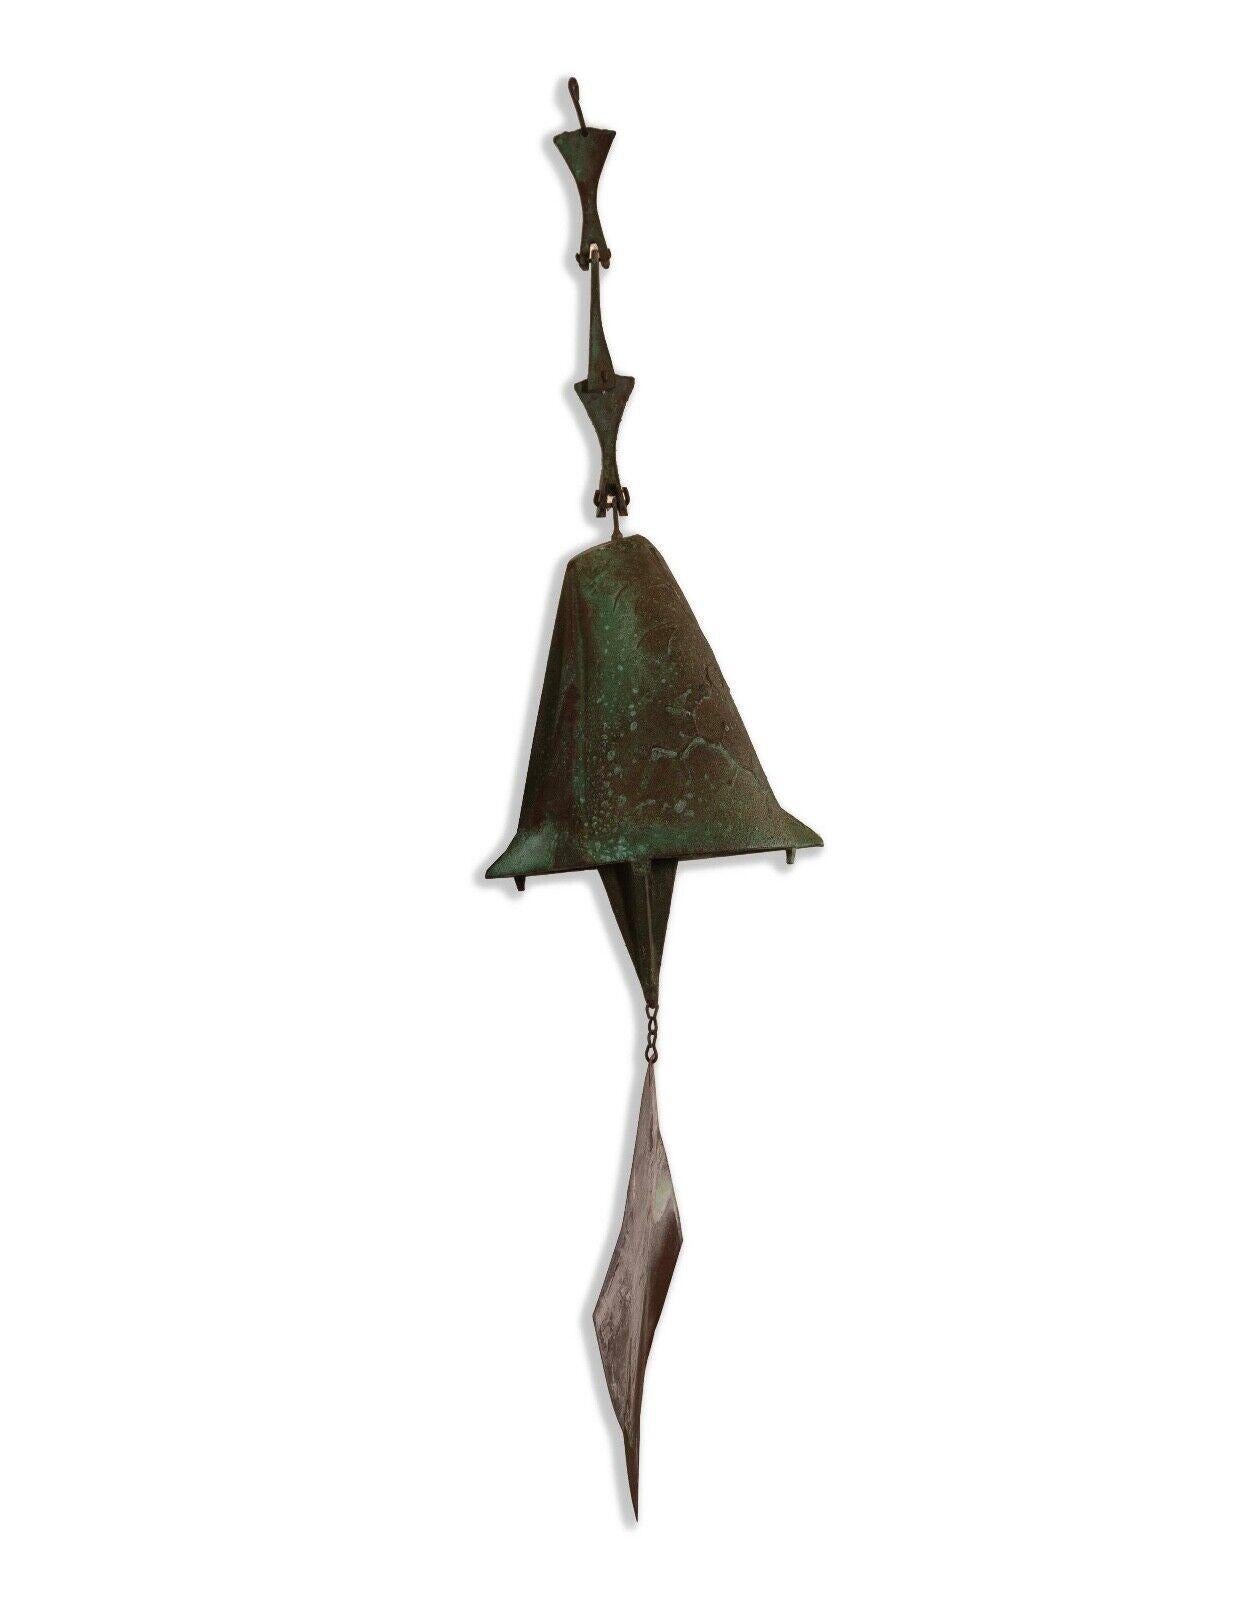 The Soleri Bronze Acrosonti Hanging Bell Sculpture is a striking example of brutalist style within mid-century modern design, characterized by its raw, textured surface and geometric simplicity. This sculpture features a rich patina that adds depth